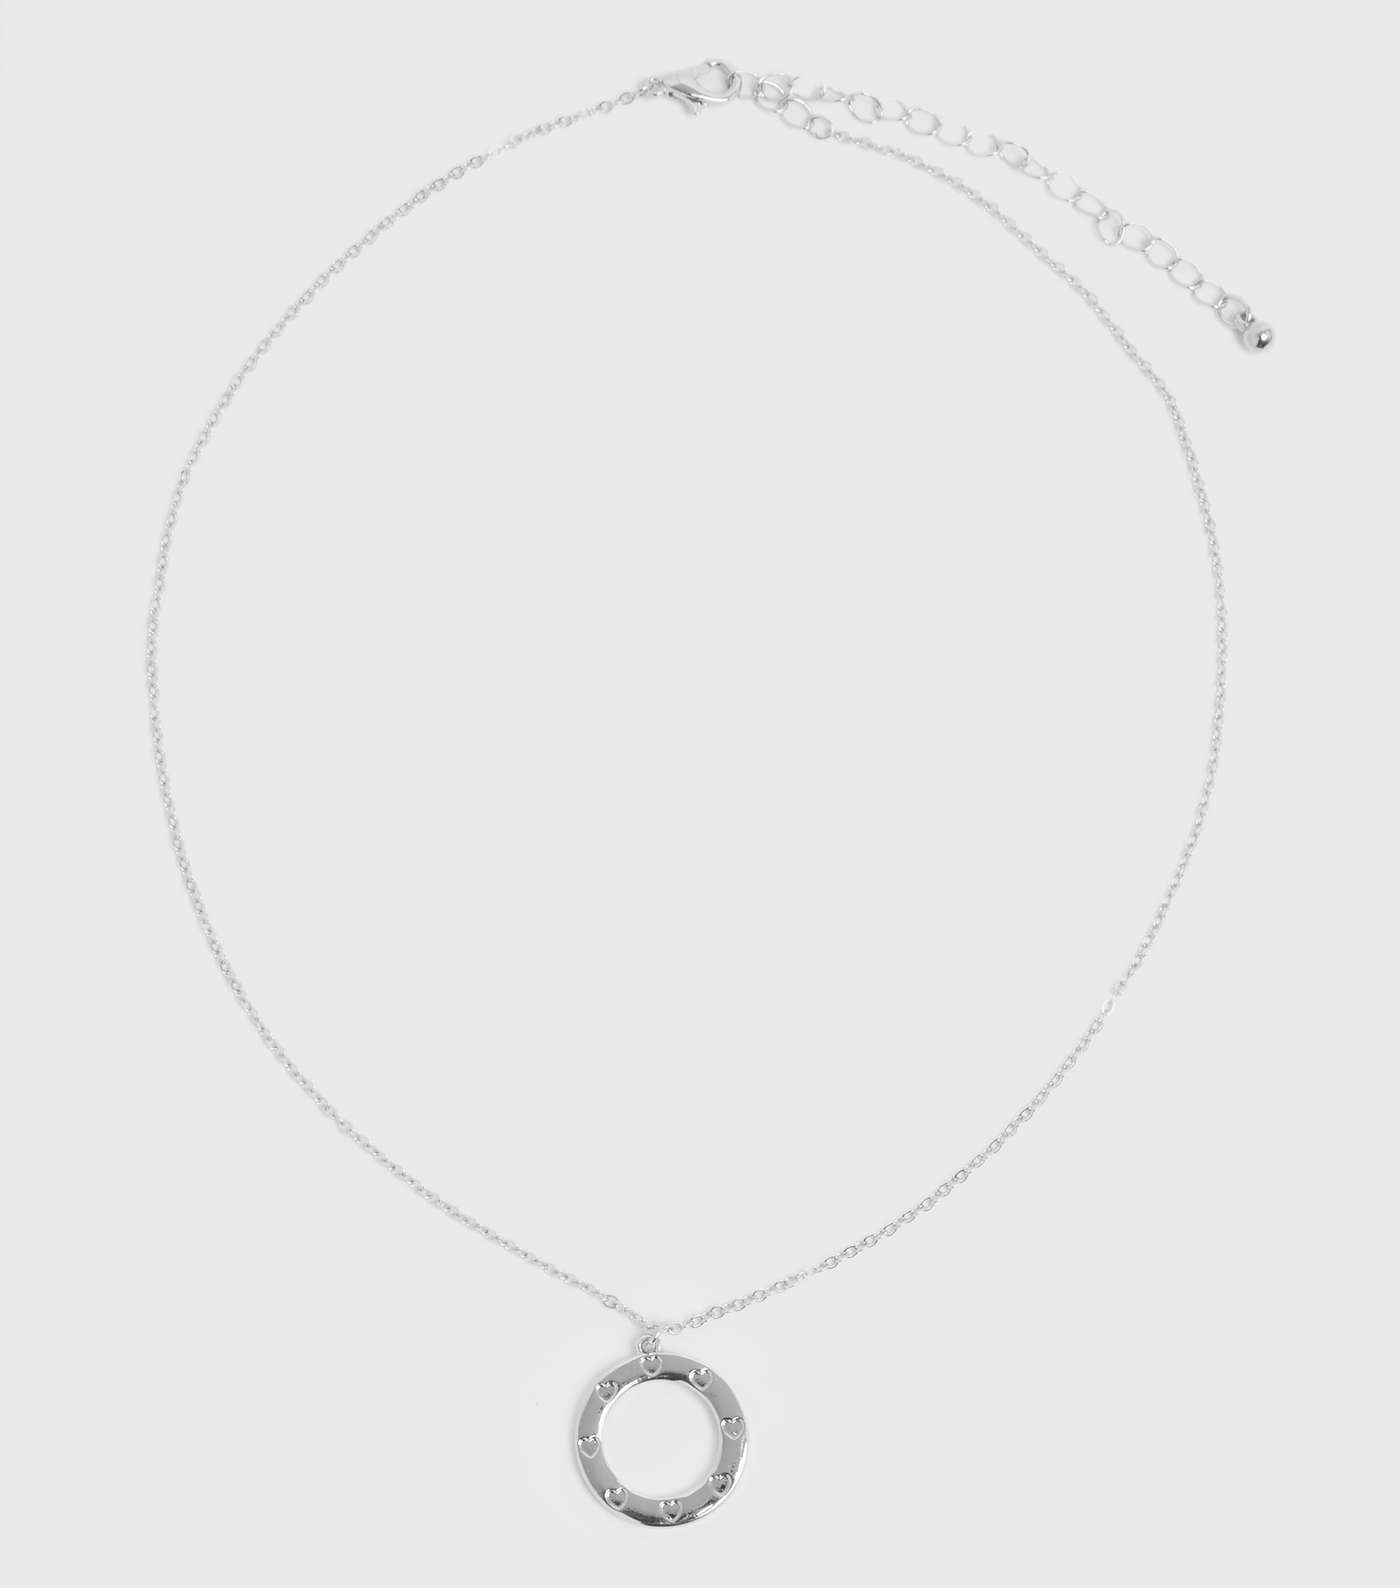 Silver Heart Engraved Circle Pendant Necklace